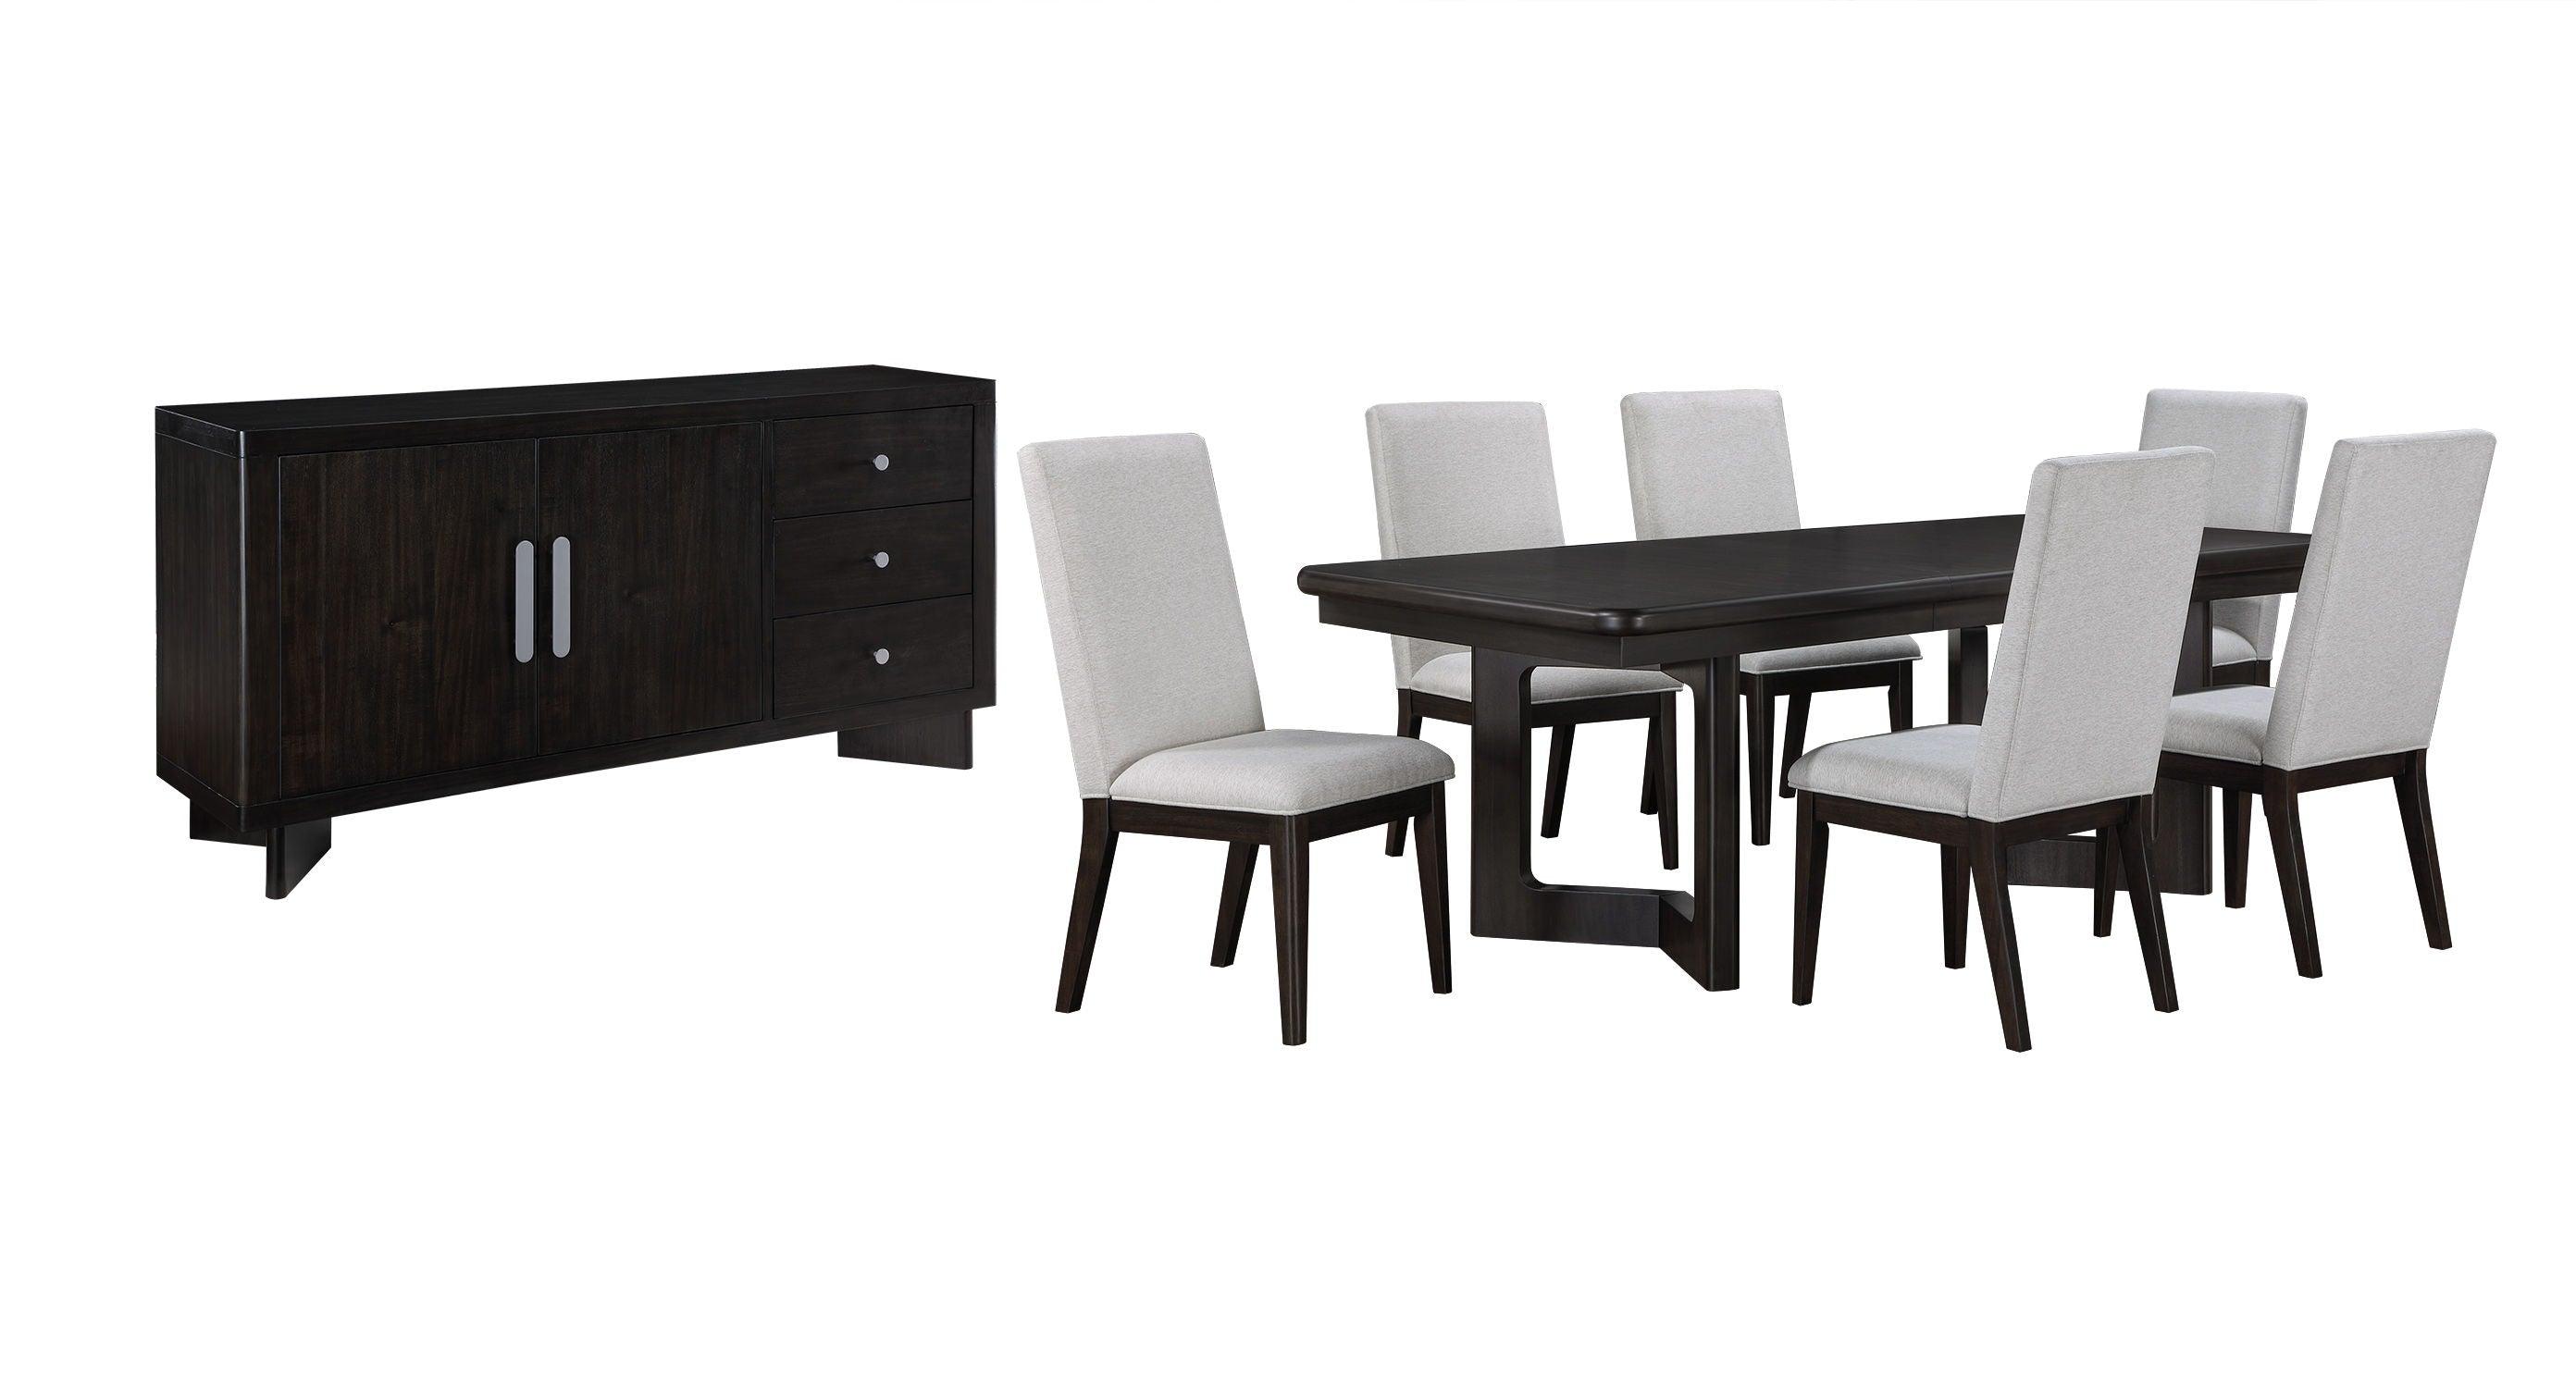 Coaster Fine Furniture - Hathaway - Rectangular Extension Dining Table - Acacia Brown - 5th Avenue Furniture